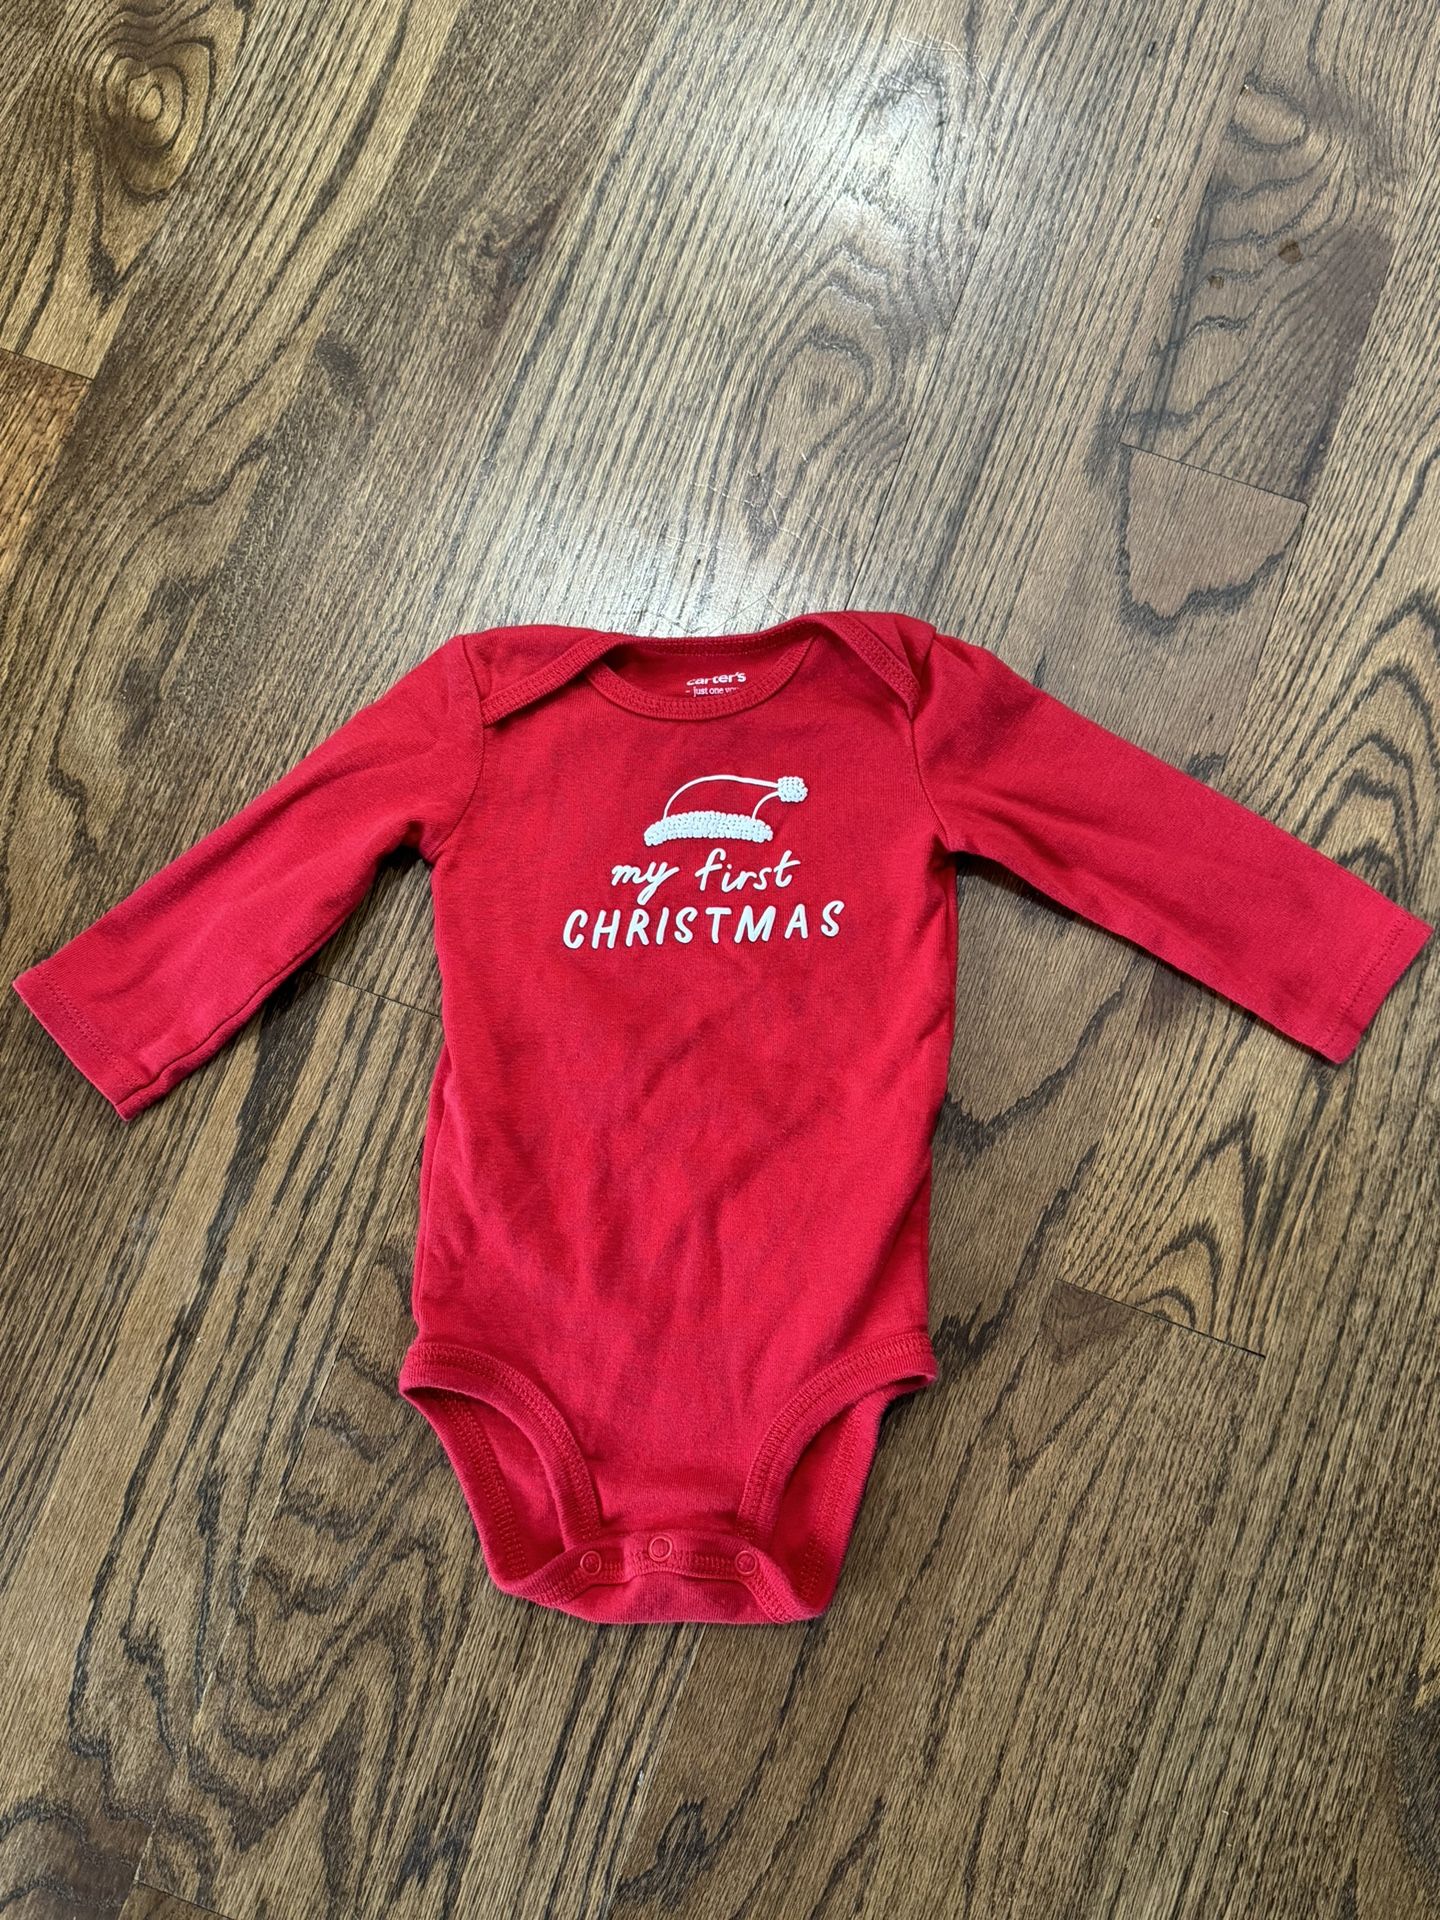 Carter’s Baby Christmas Red Bodysuits 9months